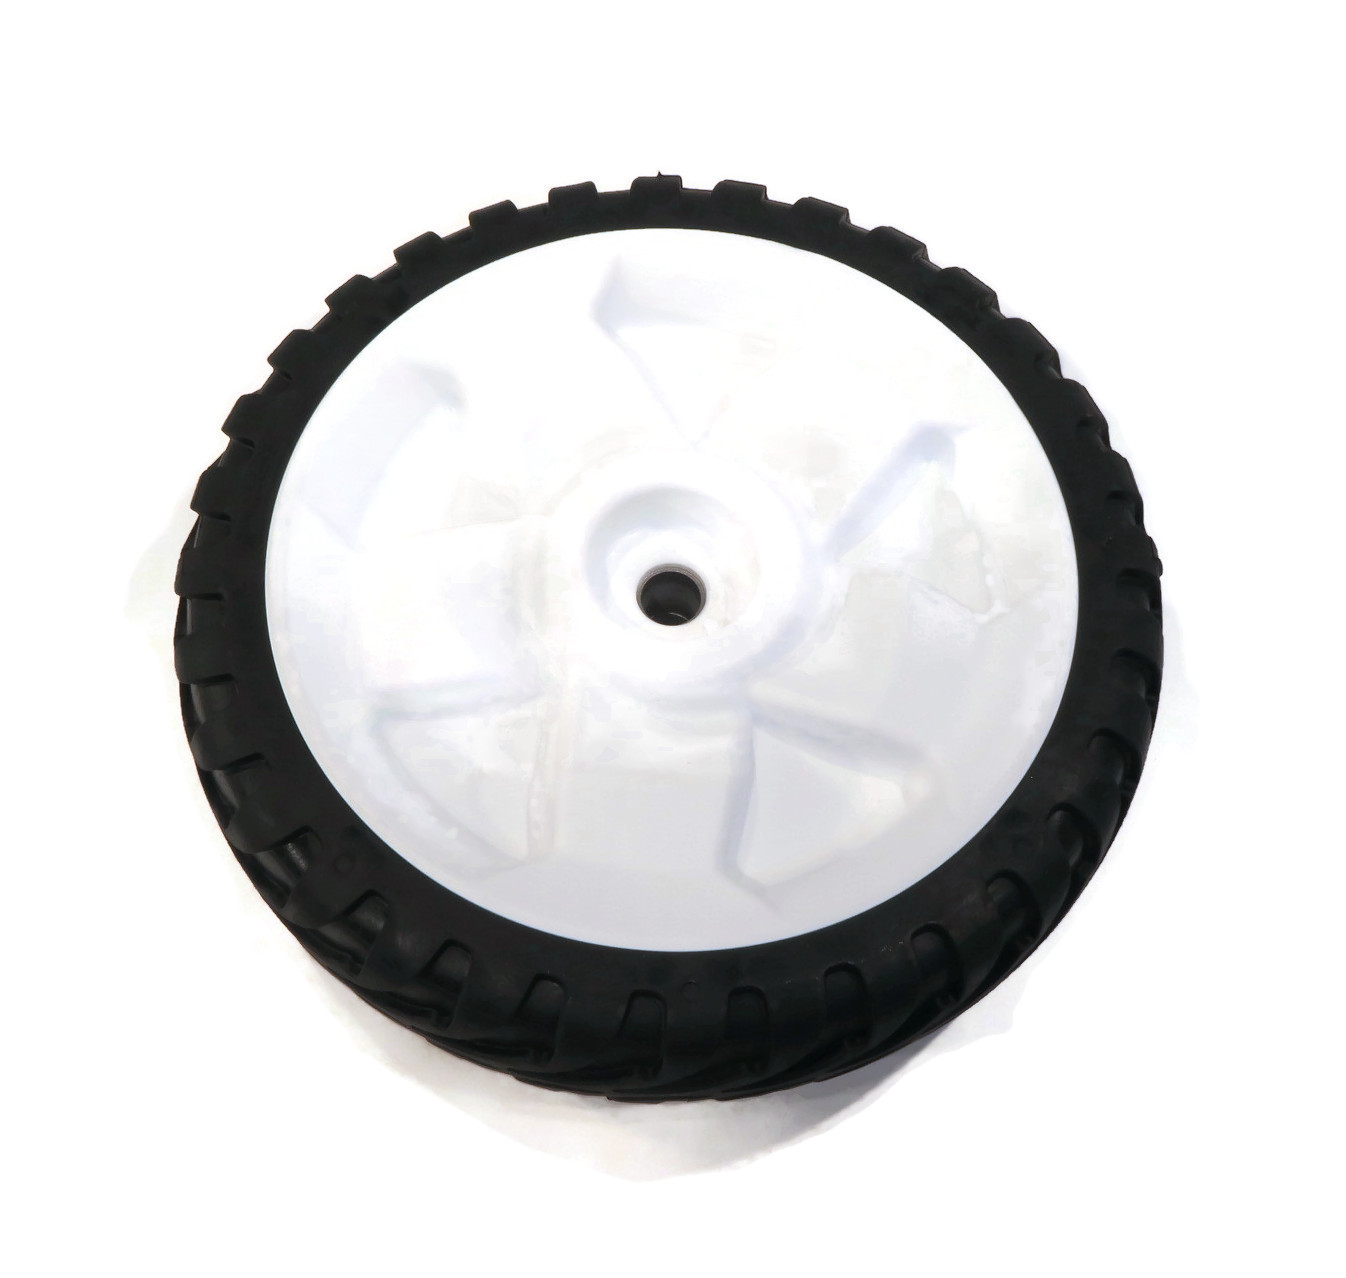 The ROP Shop | TORO OEM 8" Wheel Gear Assembly 138-3216 For RWD Push LawnMower Lawn Mower - image 4 of 7